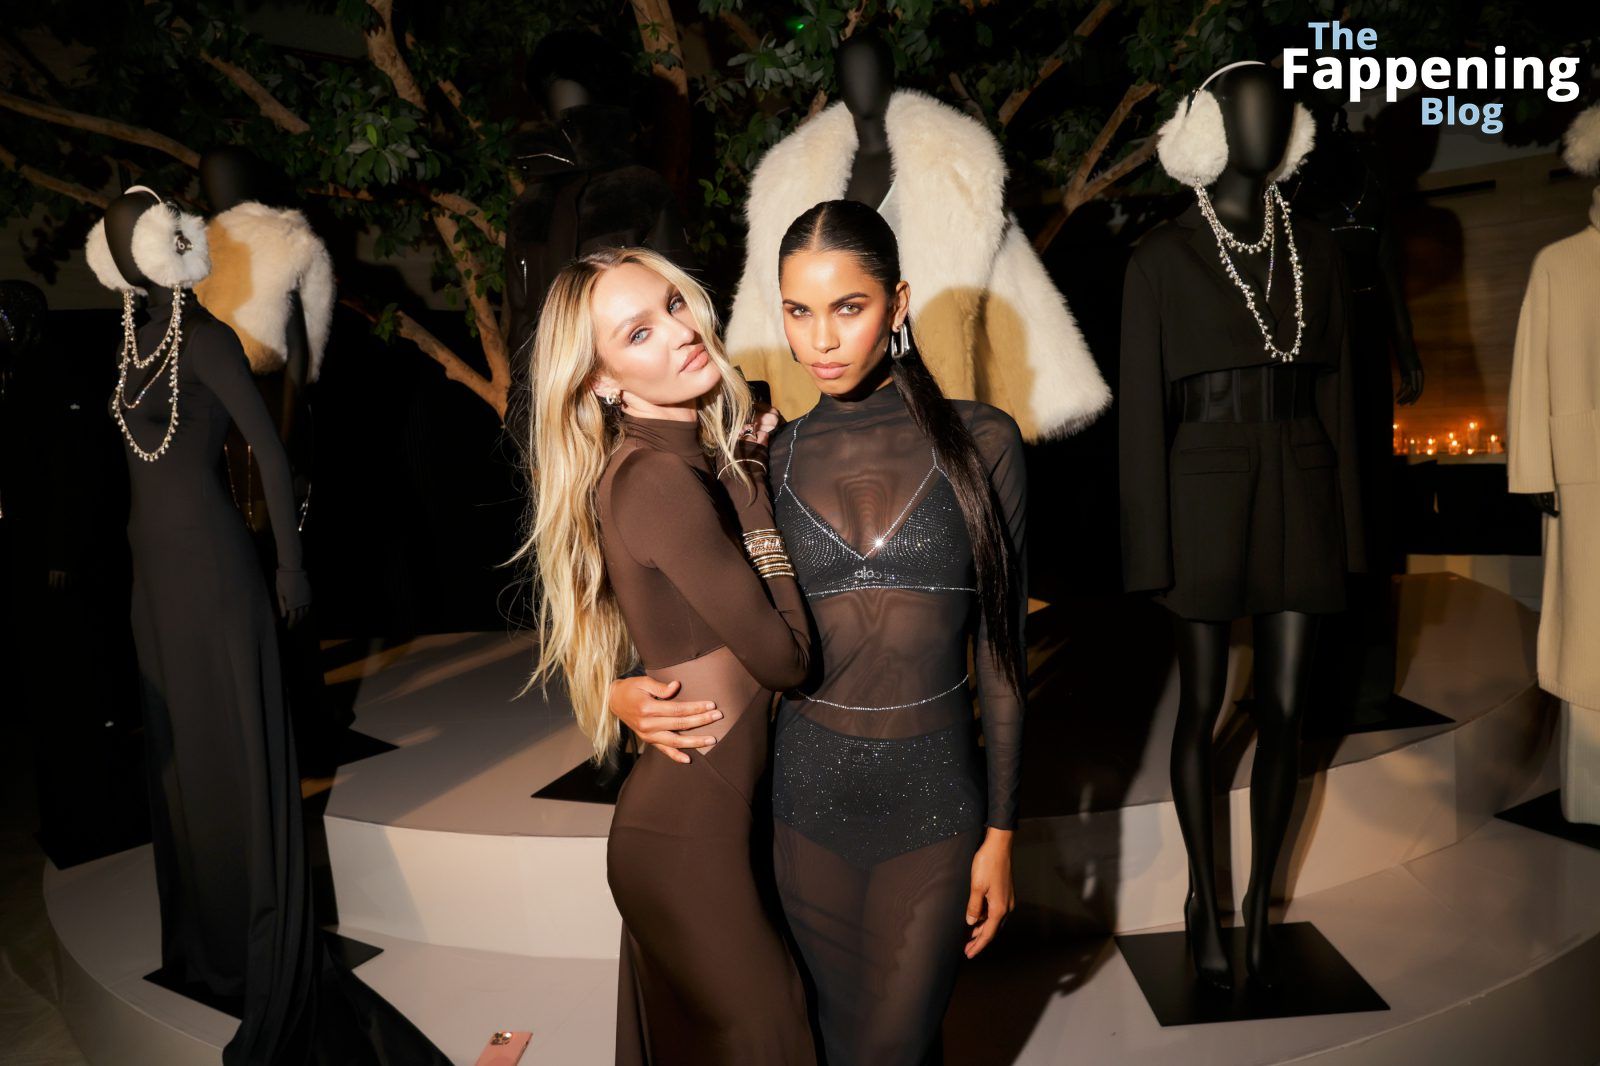 Candice Swanepoel Looks Pretty in a Tight Dress at the Alo Atelier Launch (8 Photos)